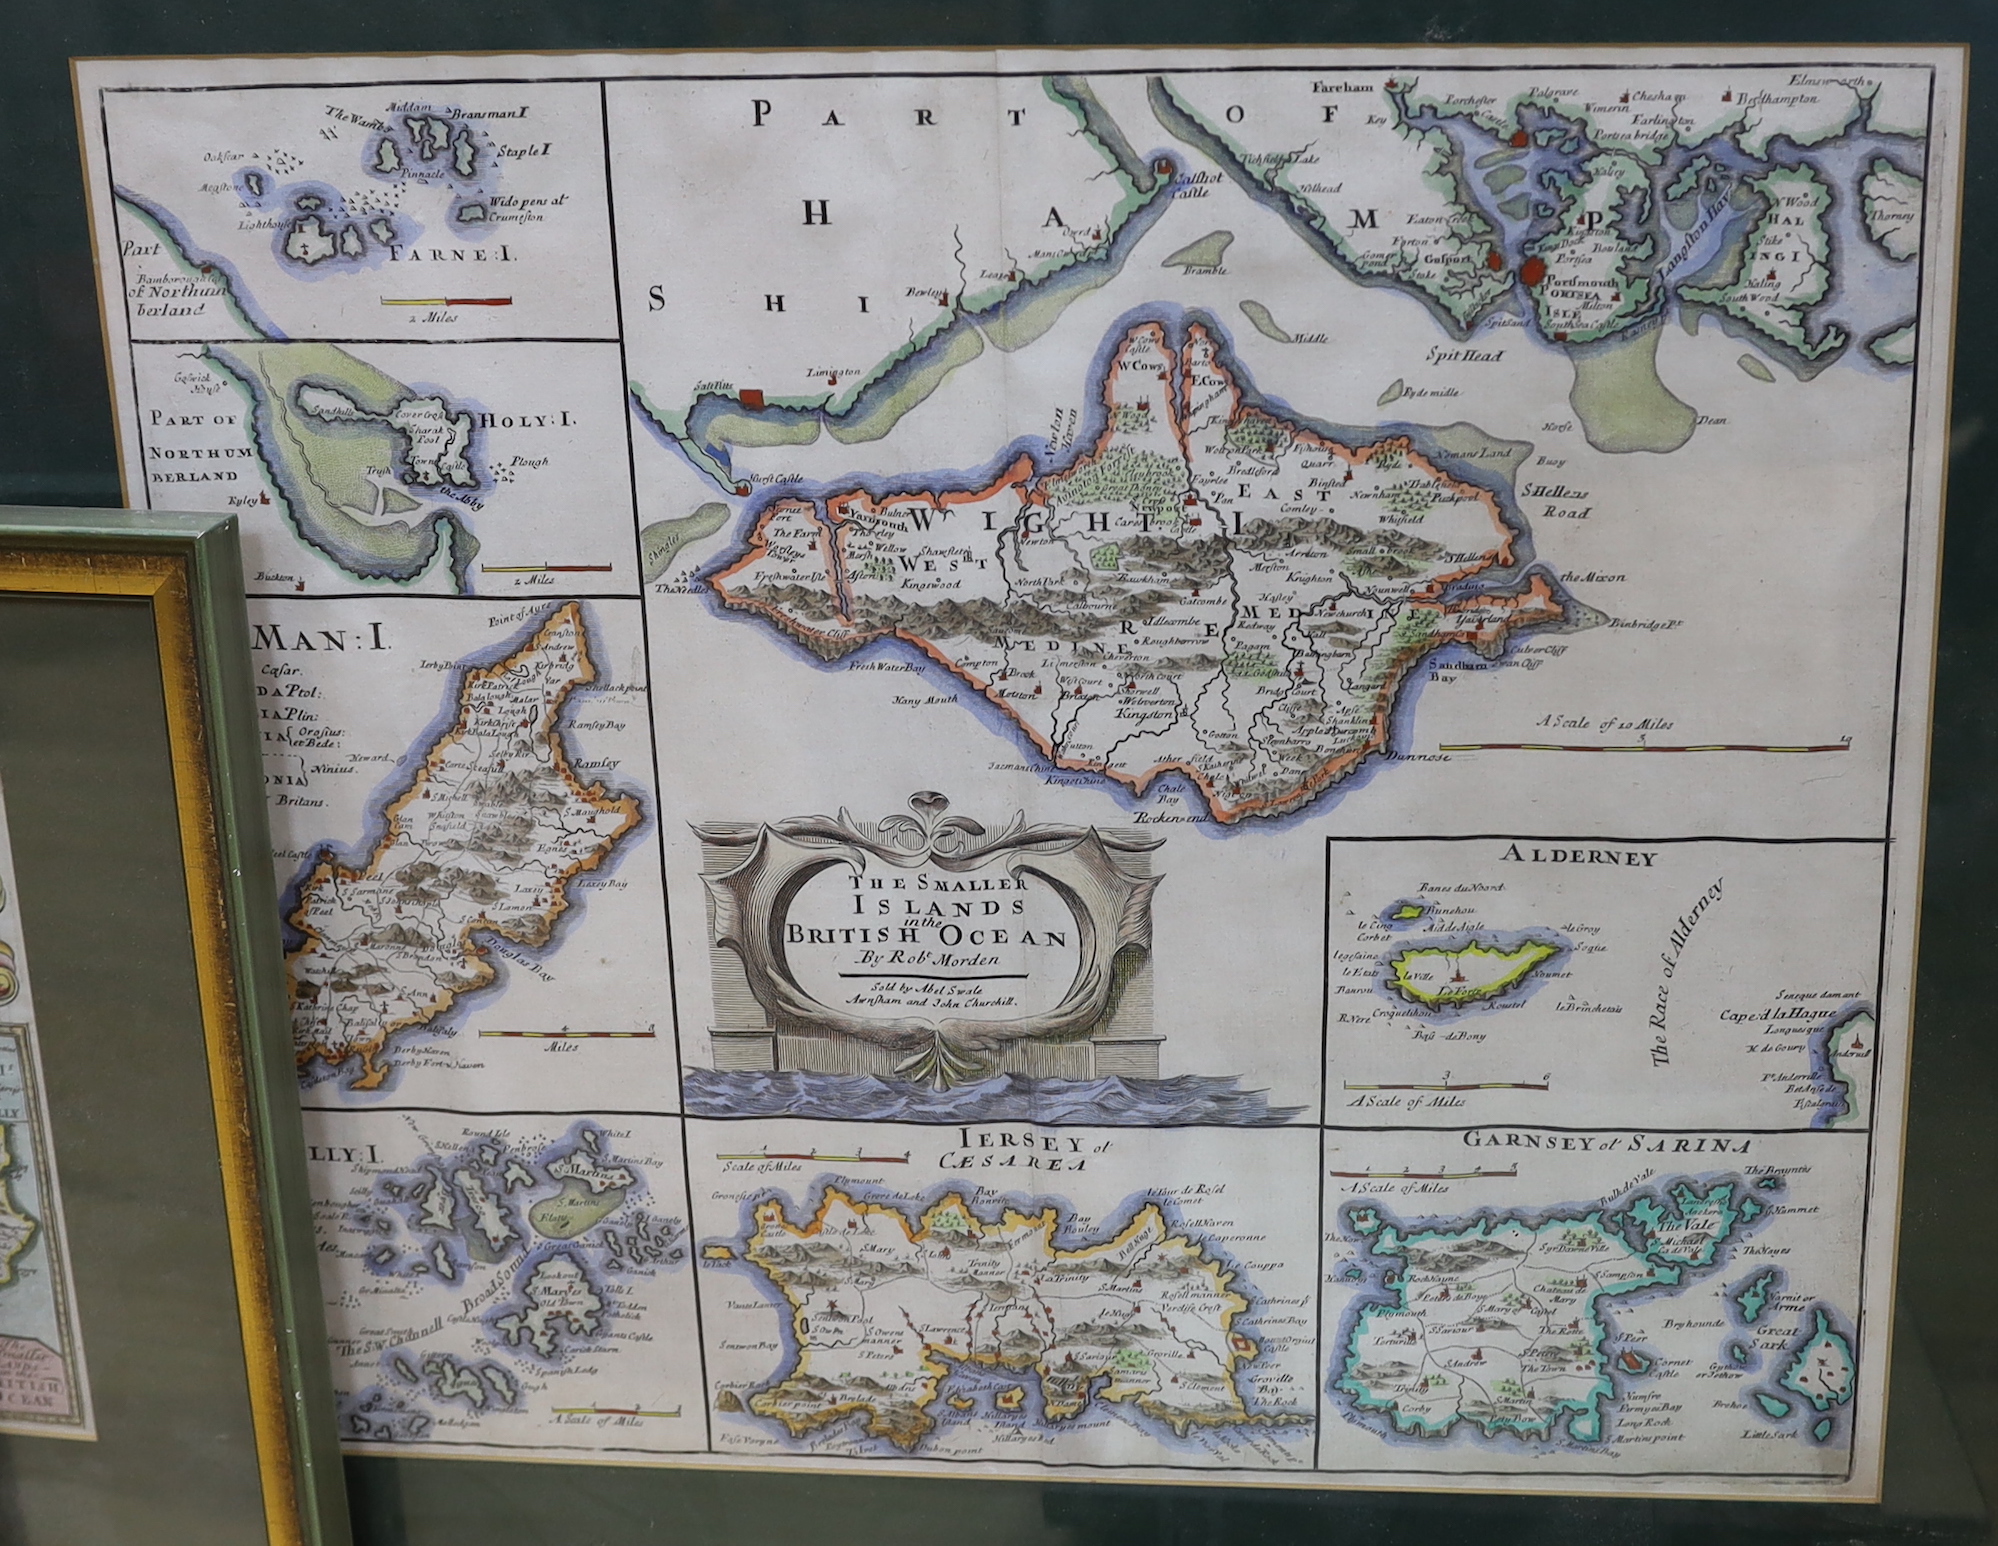 Robert Morden (1650-1703), hand coloured map, The smaller islands in the British Ocean, sold by Abel Swale, Awnsham and John Churchill, 37 x 42cm, The Road from London to Southampton, the Smaller Islands of the British O